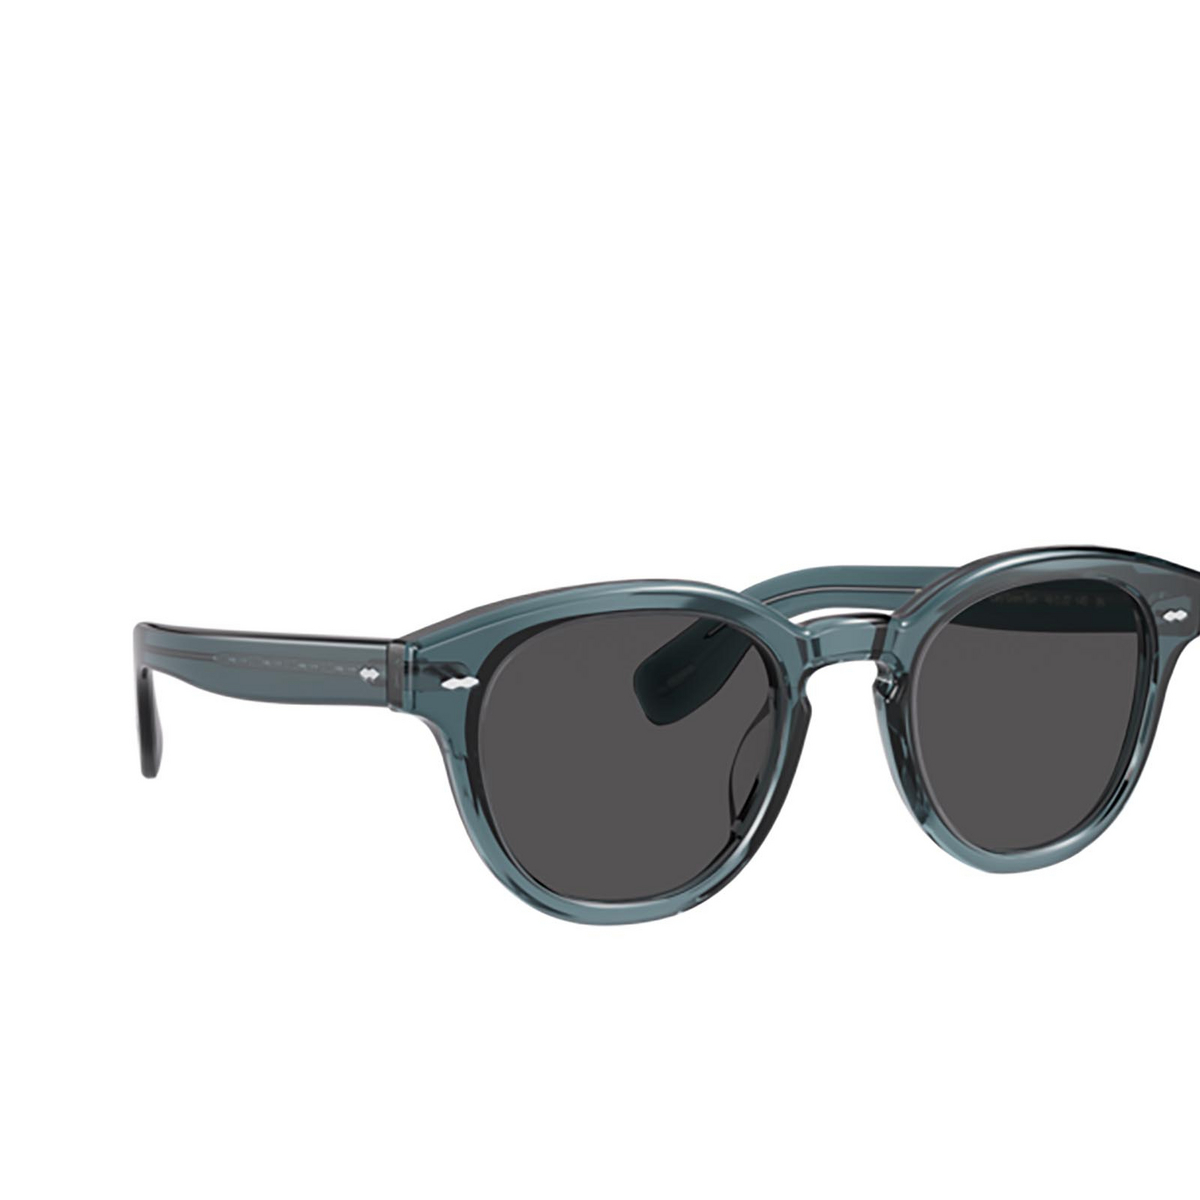 Oliver Peoples® Sunglasses: Cary Grant Sun OV5413SU color Washed Teal 1617R5 - front view.